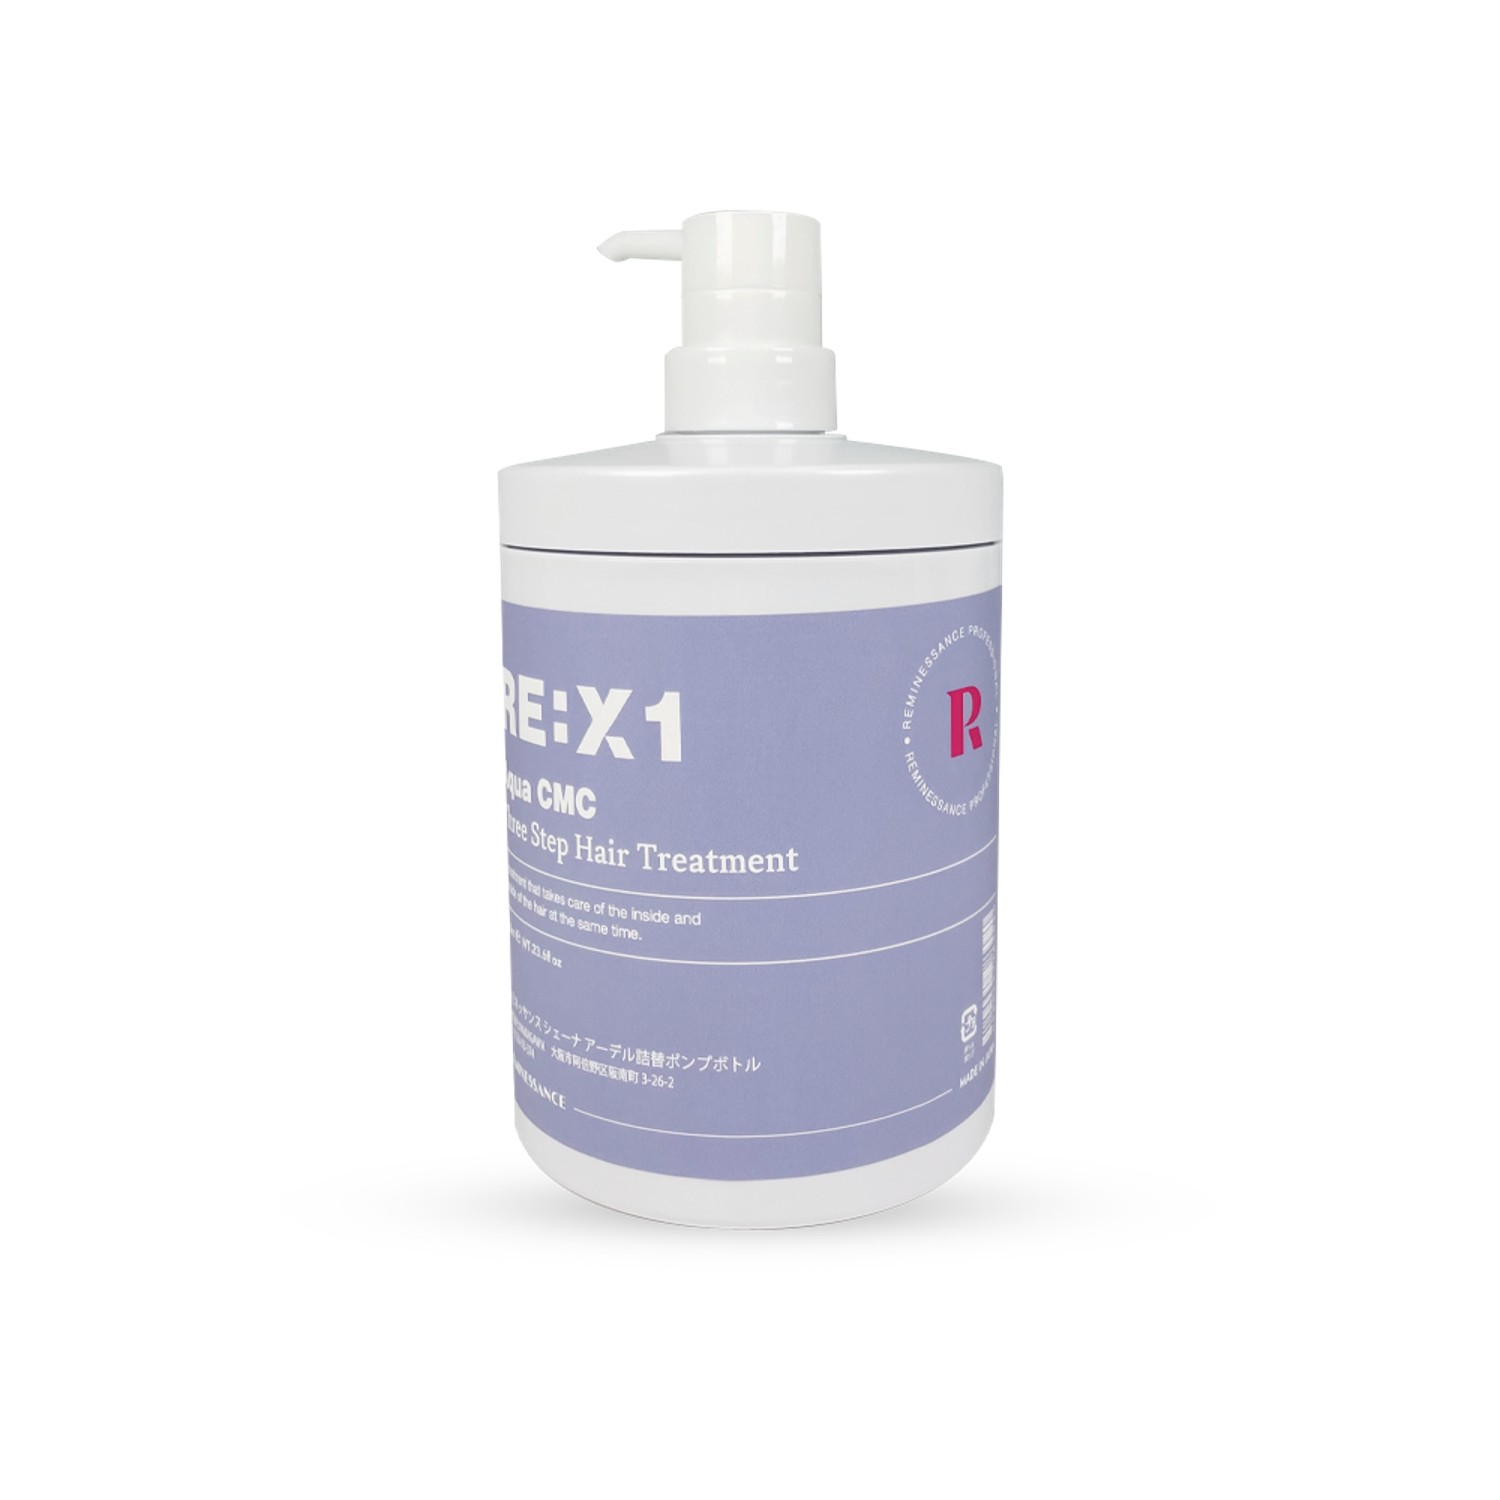 RE:X1 Treatment and Refill Container